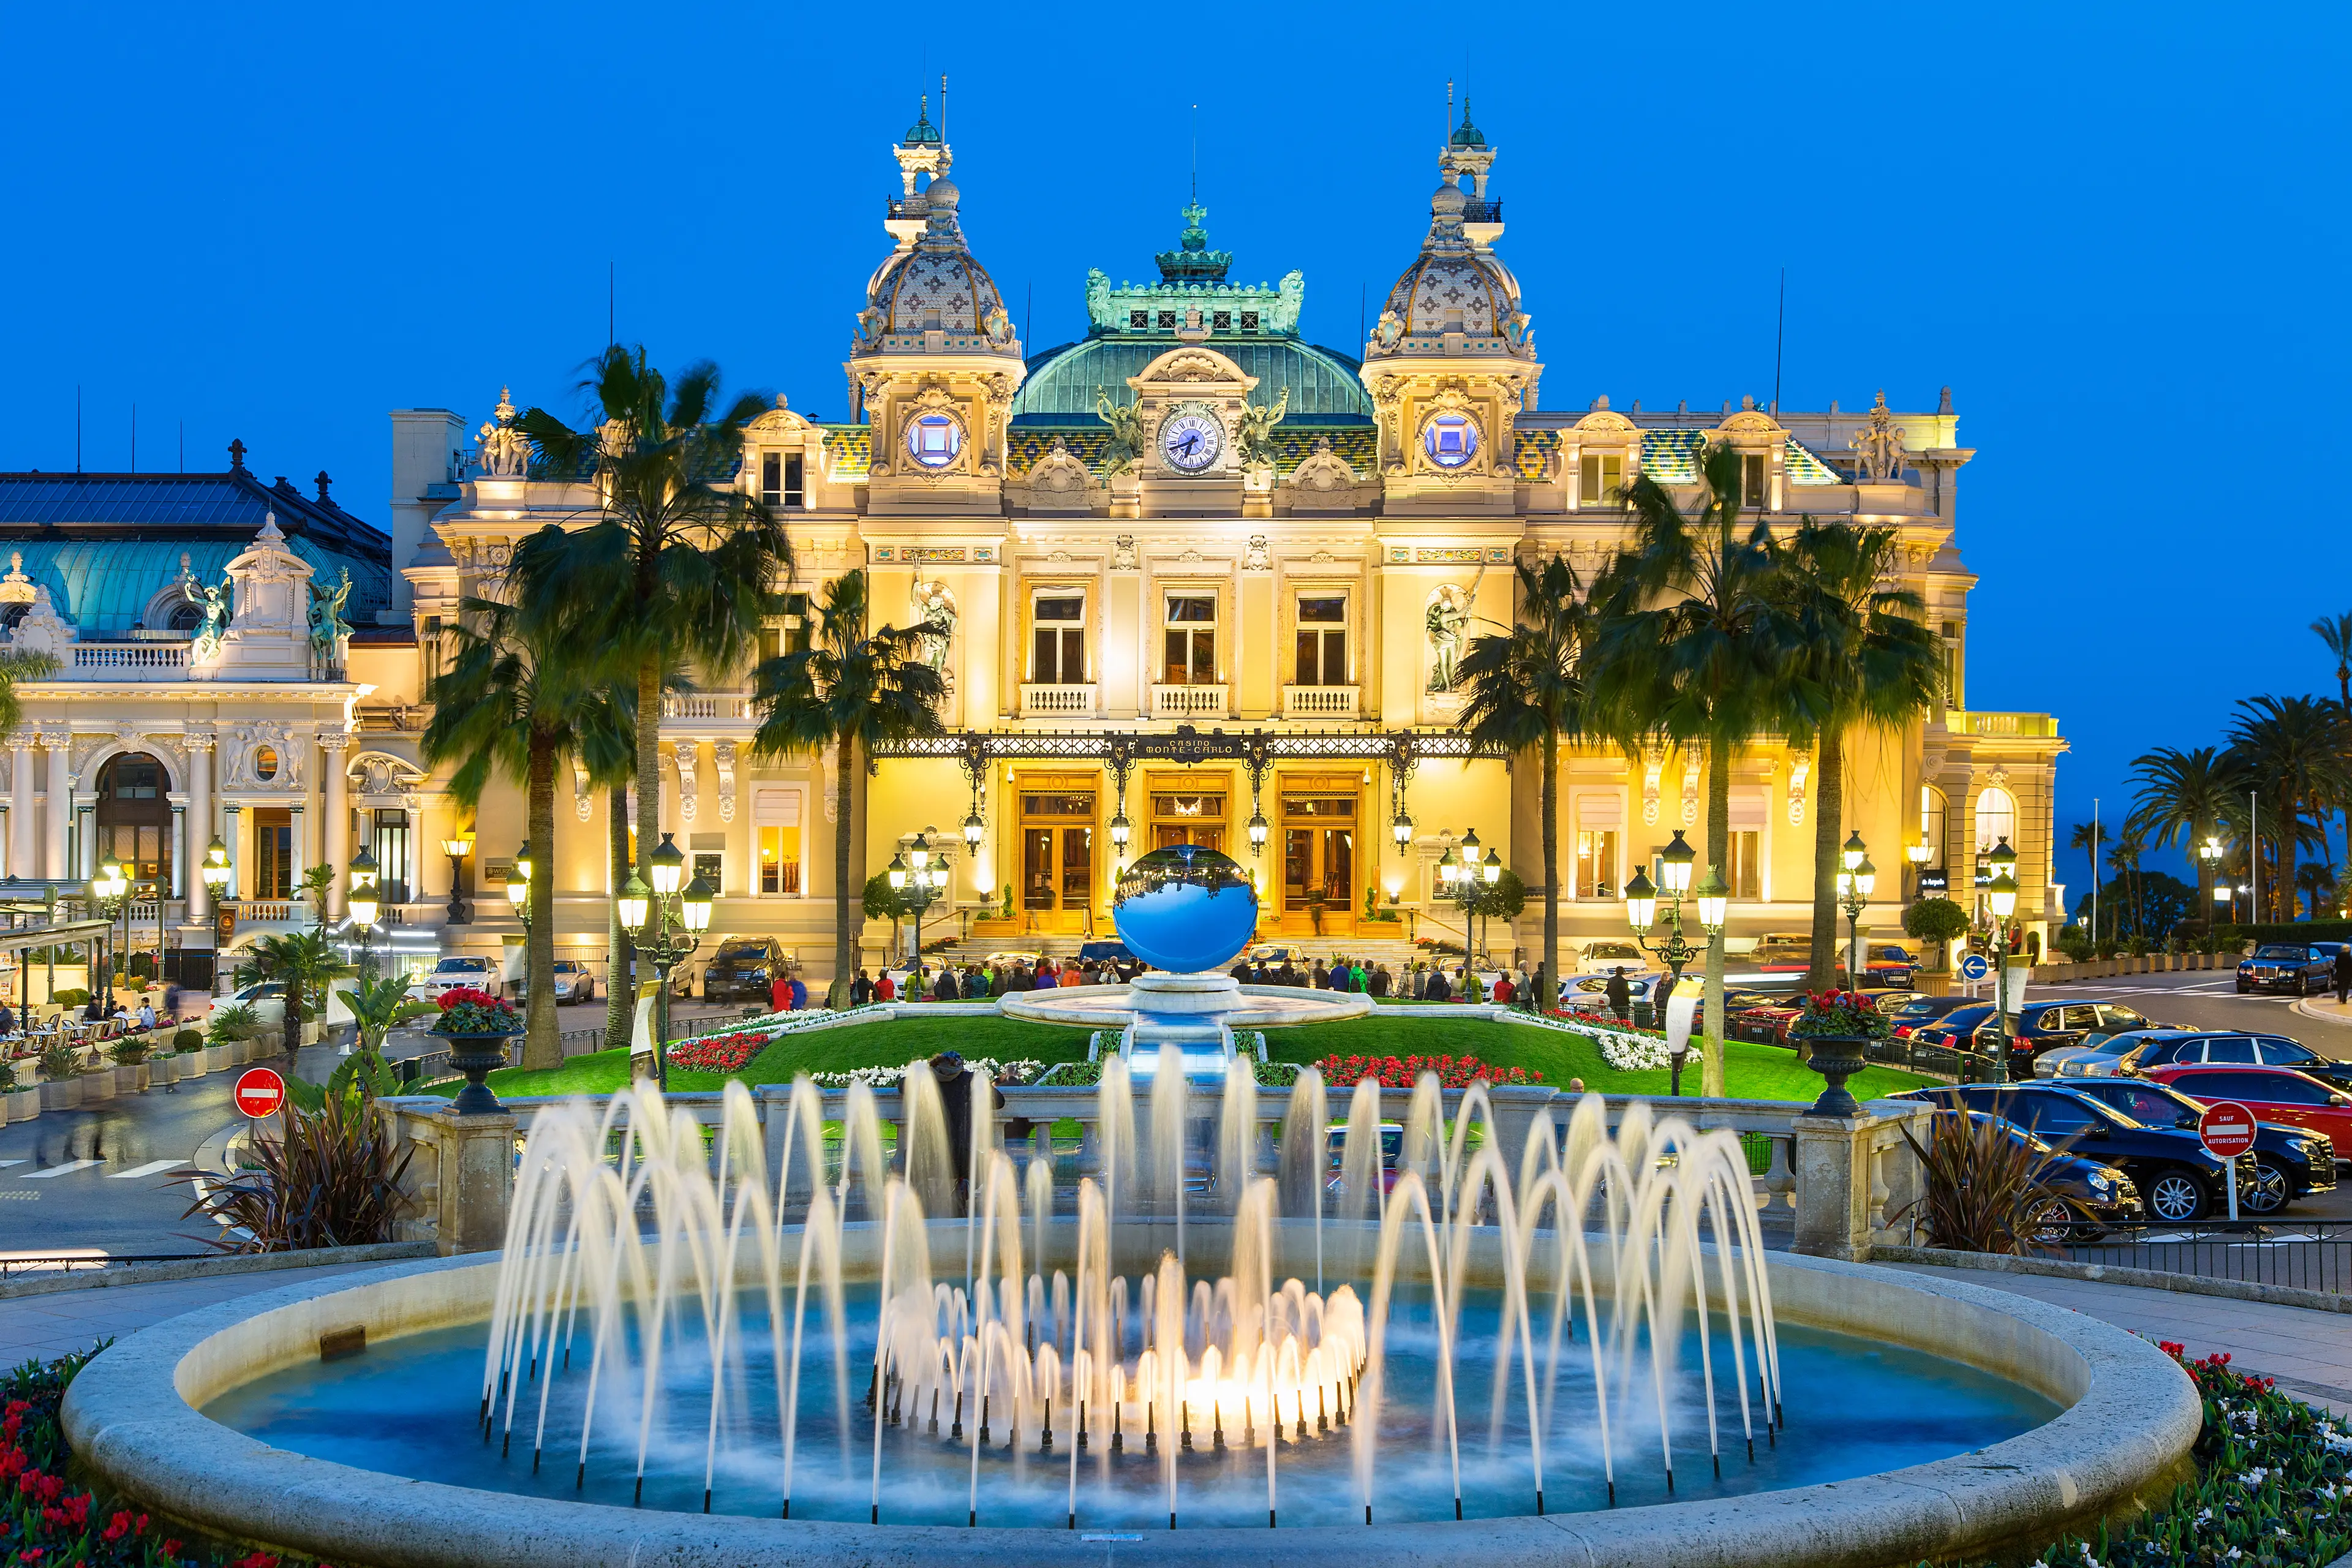 3-Day French Riviera Adventure: Shopping & Unexplored Paths with Friends